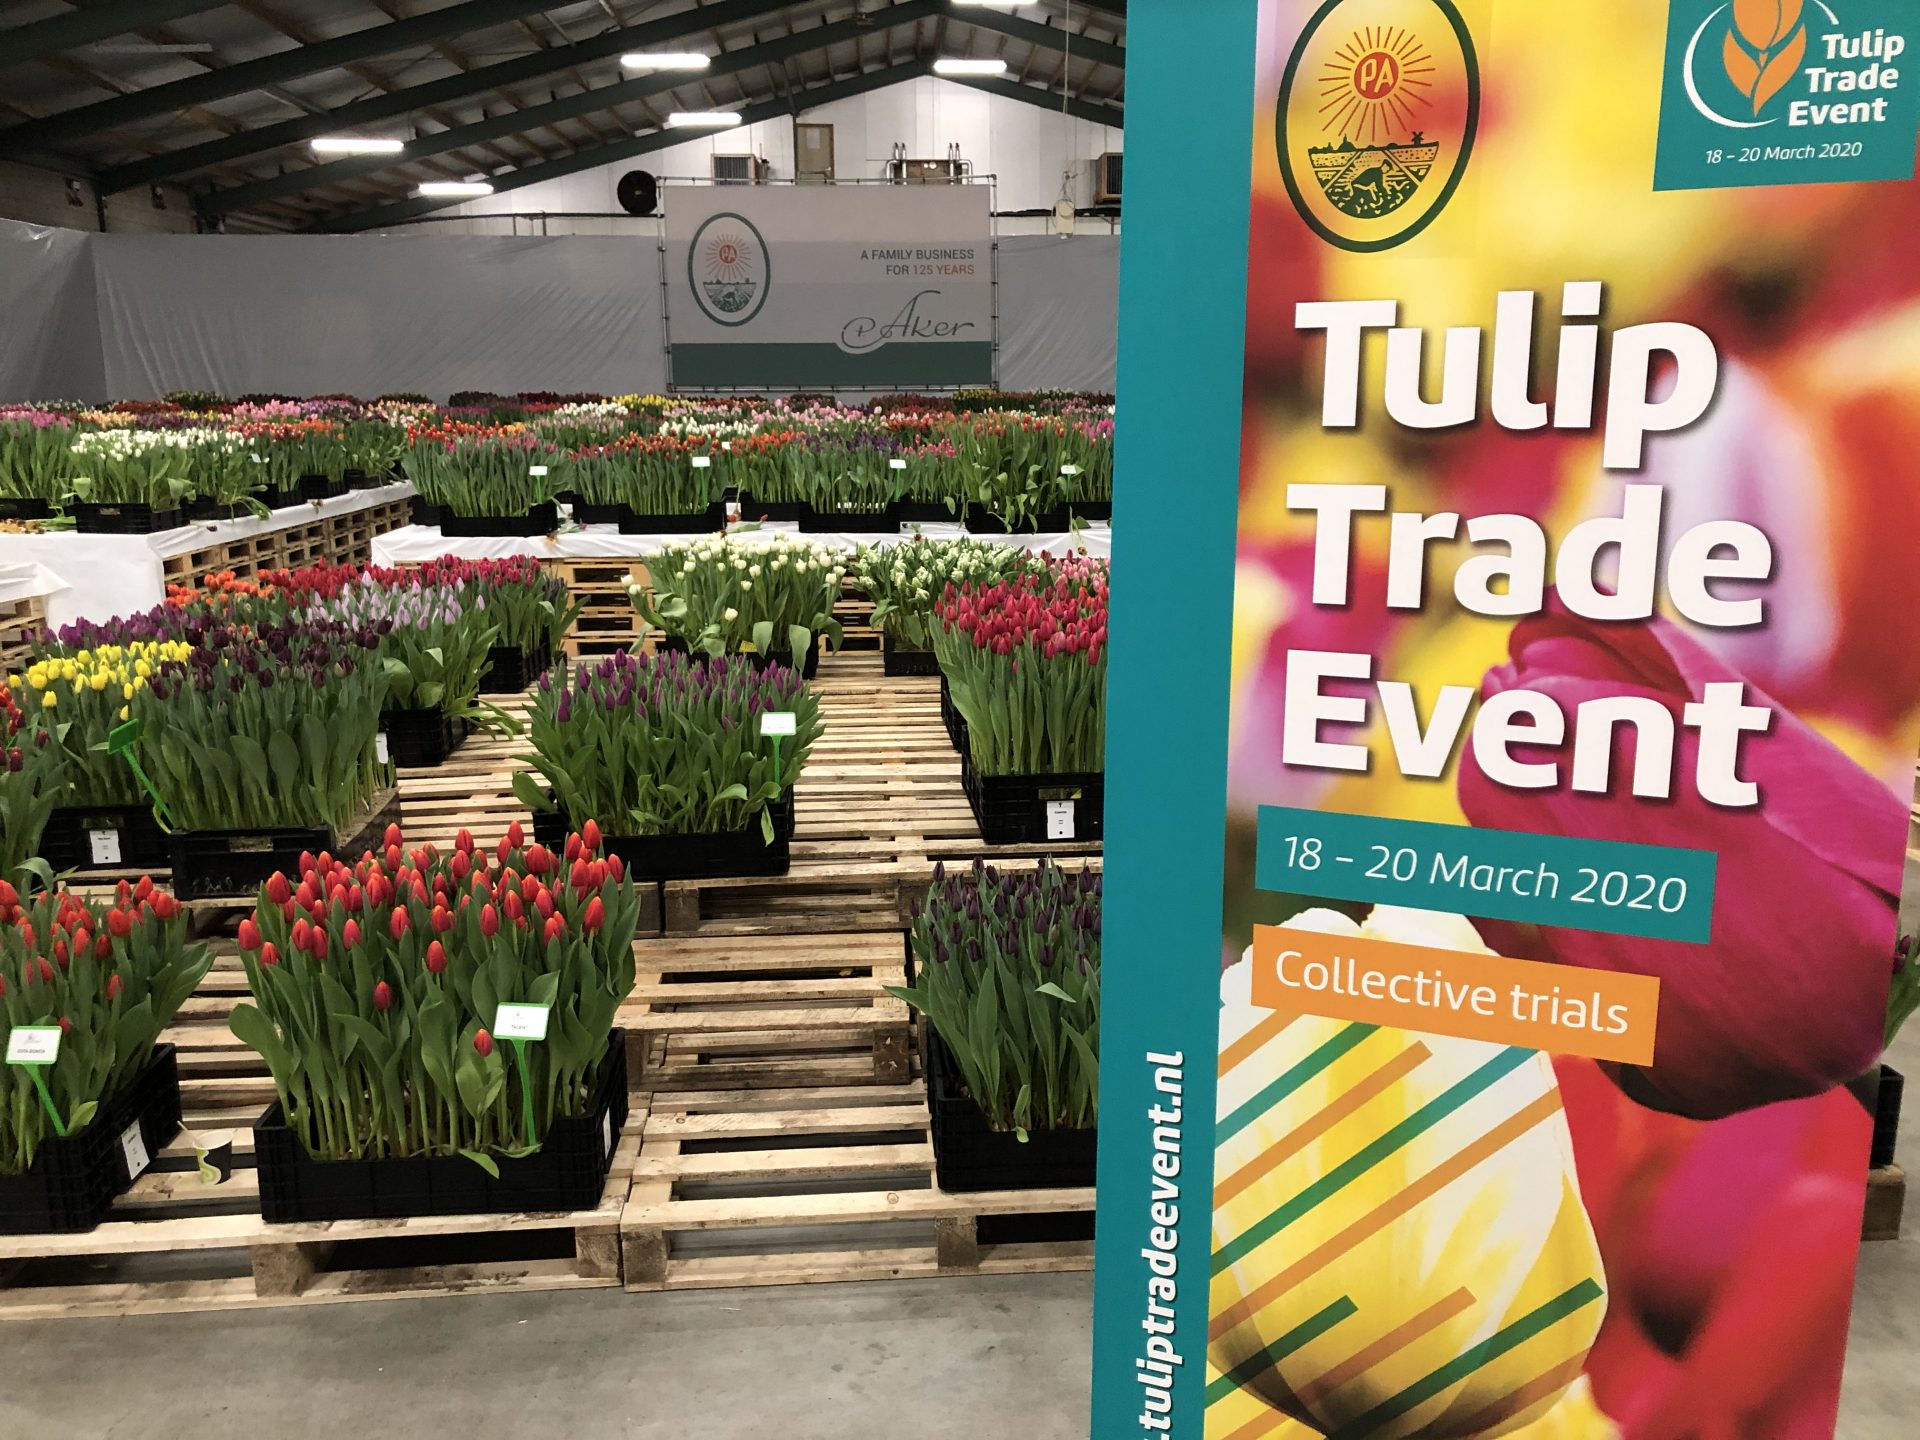 Tulip Trade Event 2020 at P. Aker the digital way